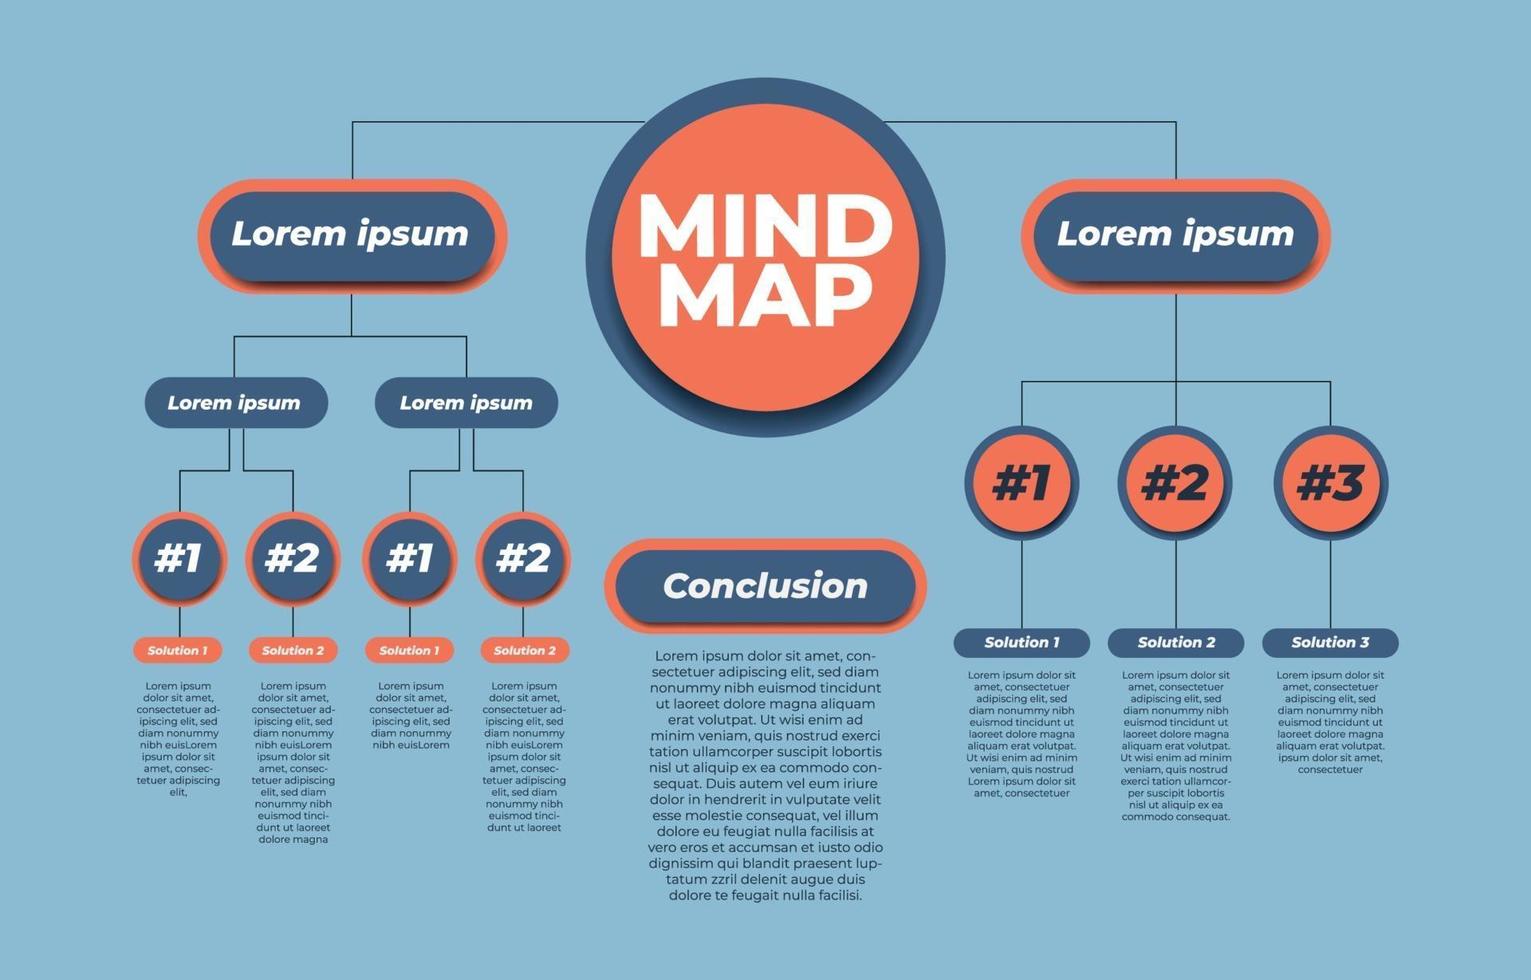 Mind Map Template vector